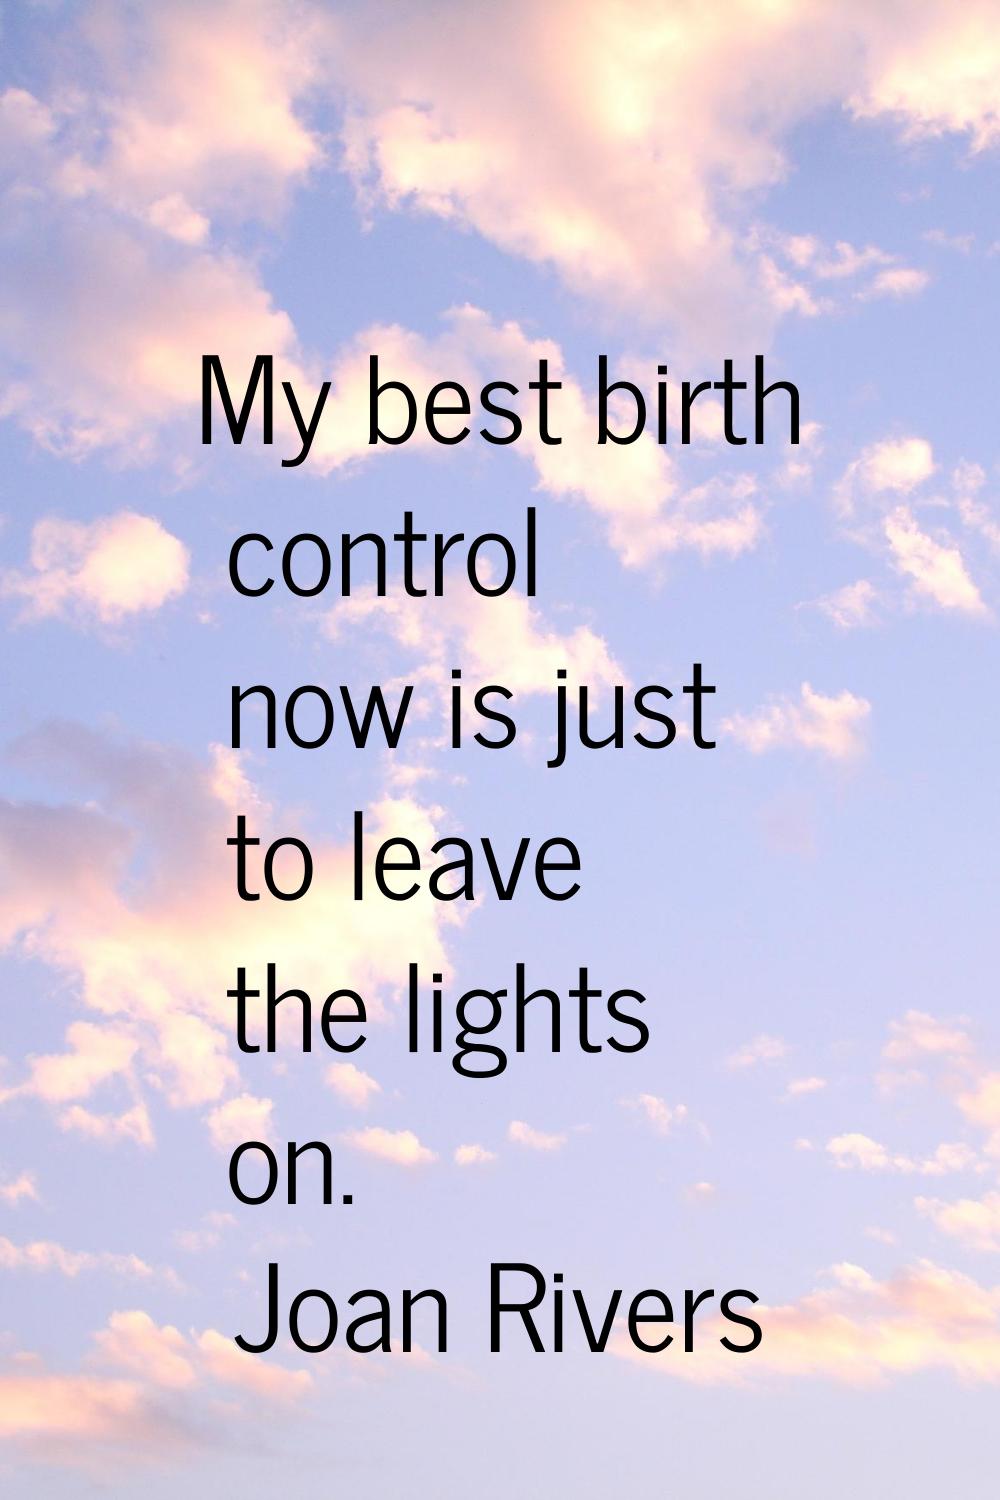 My best birth control now is just to leave the lights on.